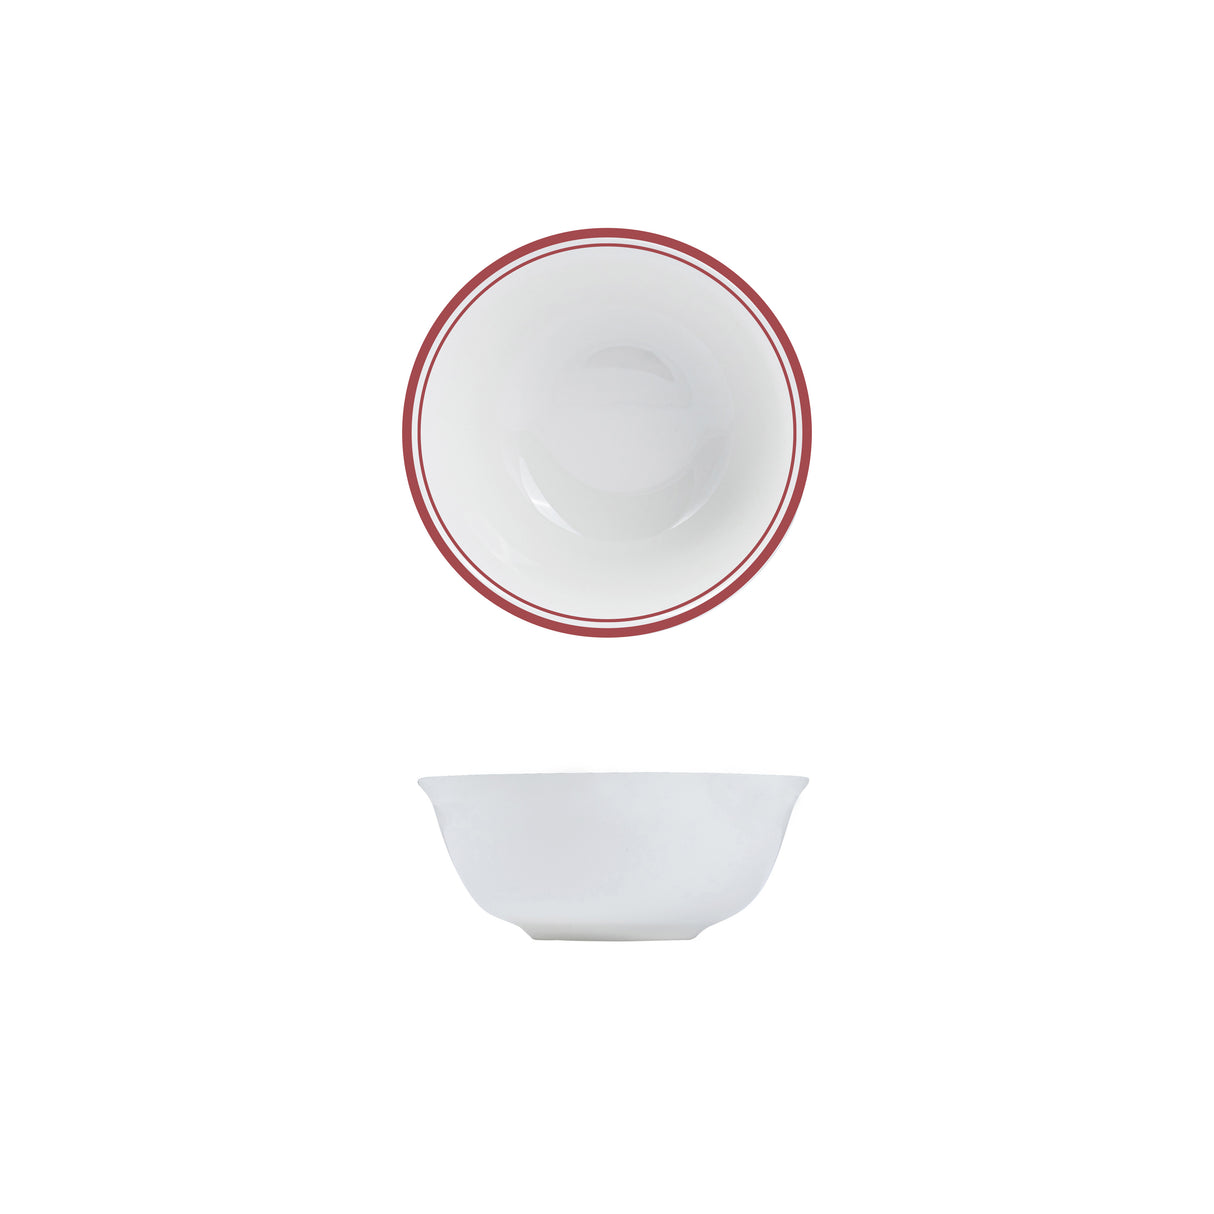 Nano Cru Cereal Bowl Red 160mm/ 580Ml : Pack of 12